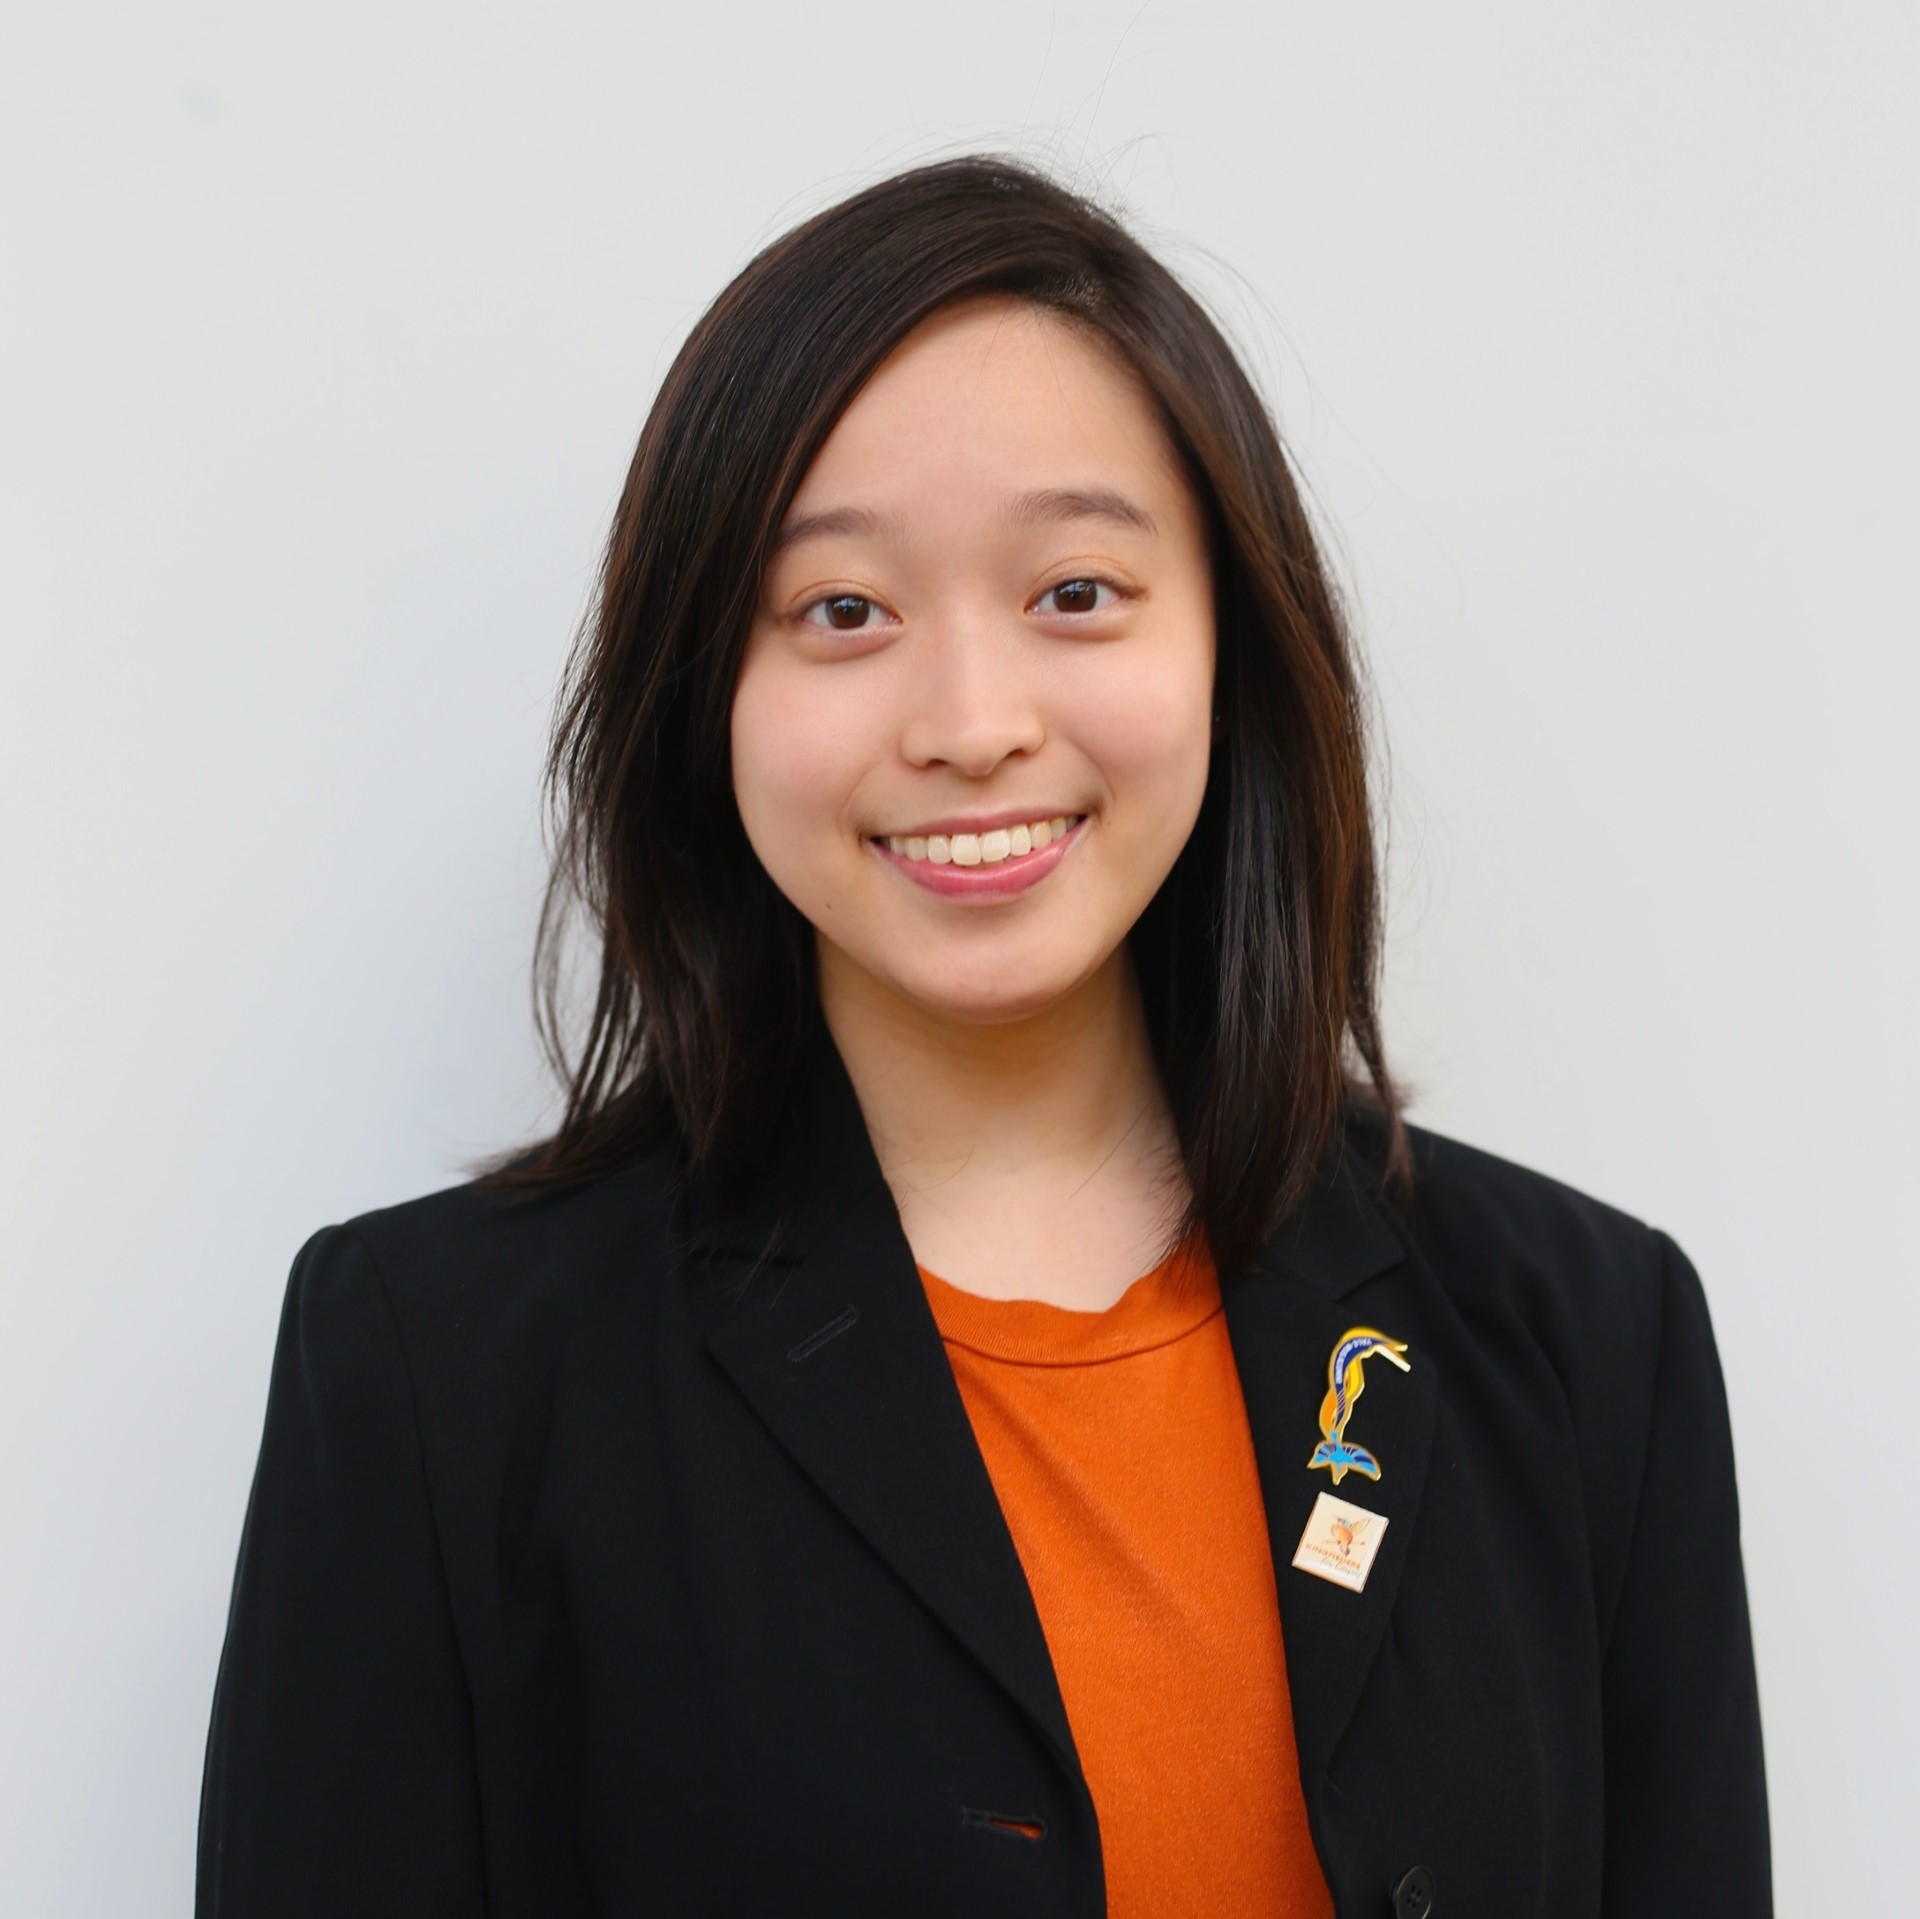 A headshot of smiling Sherice Ngaserin Ng Jing Ya who has black hair of shoulder length. Sherice is wearing an orange shirt and a black blazer, on the left lapel are Yale-NUS pins for alumni and Kingfishers for Consent.